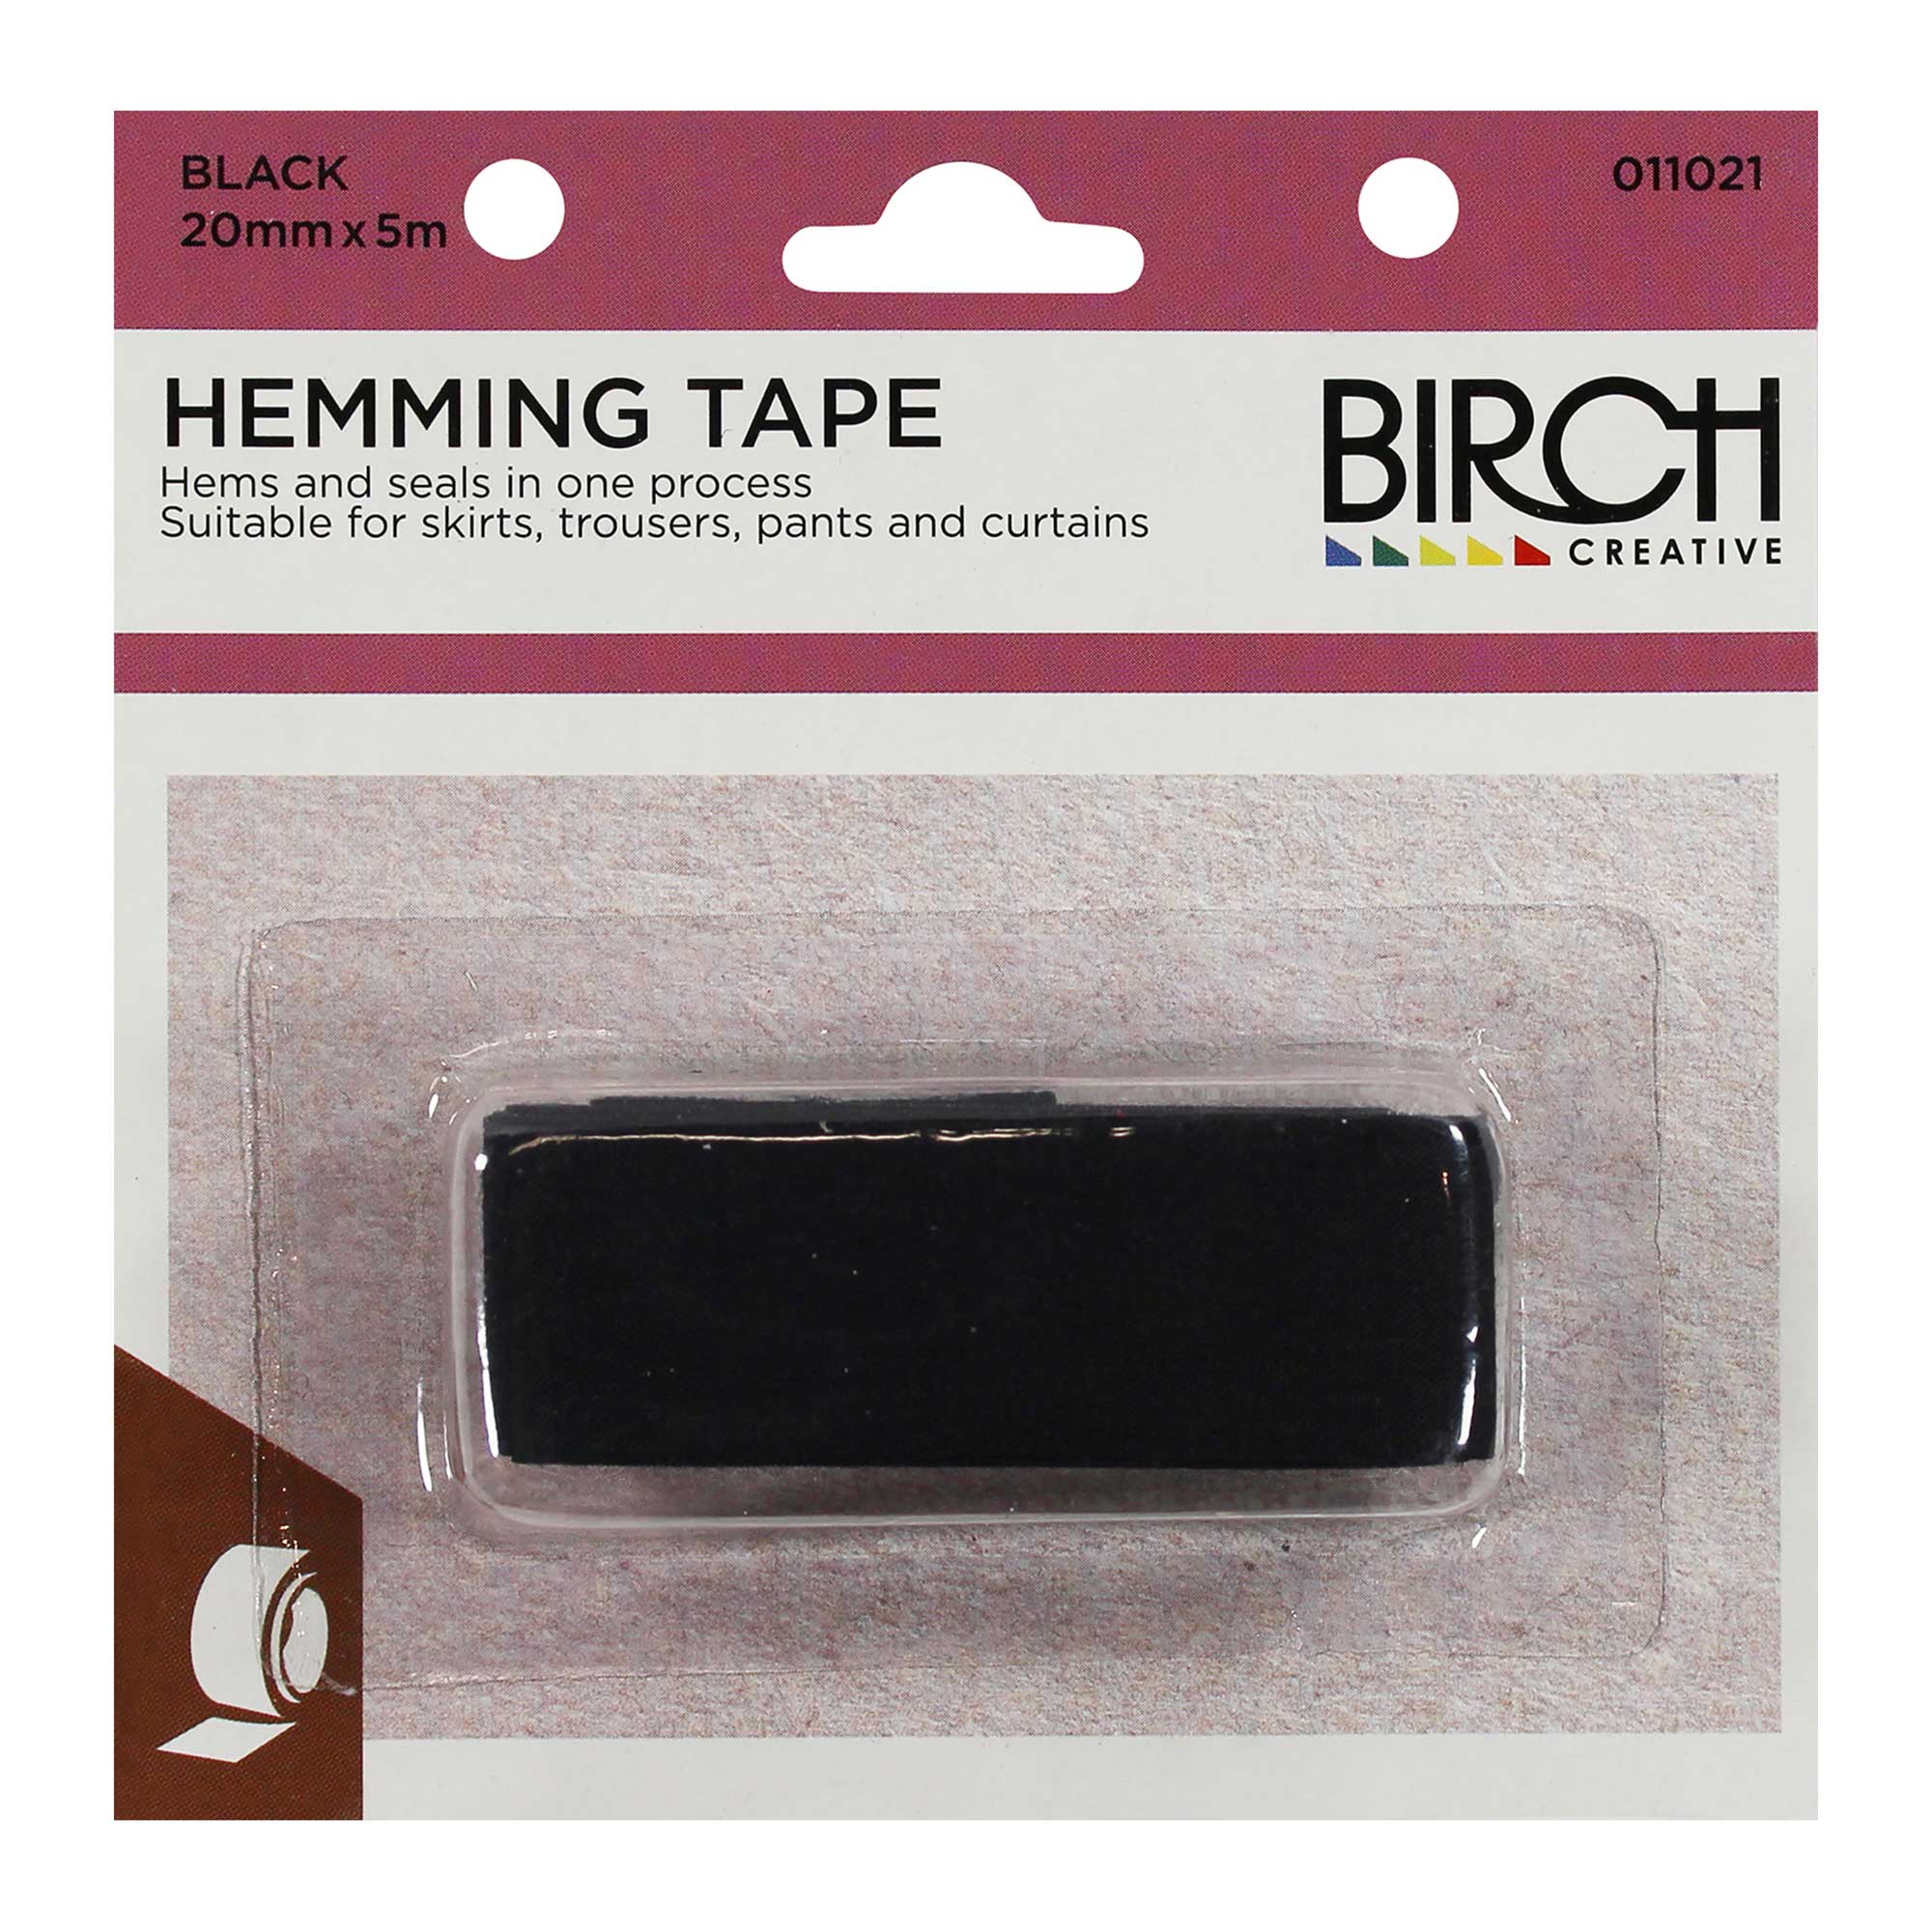 Iron on Hemming Tape in Black – A Stitch in Time